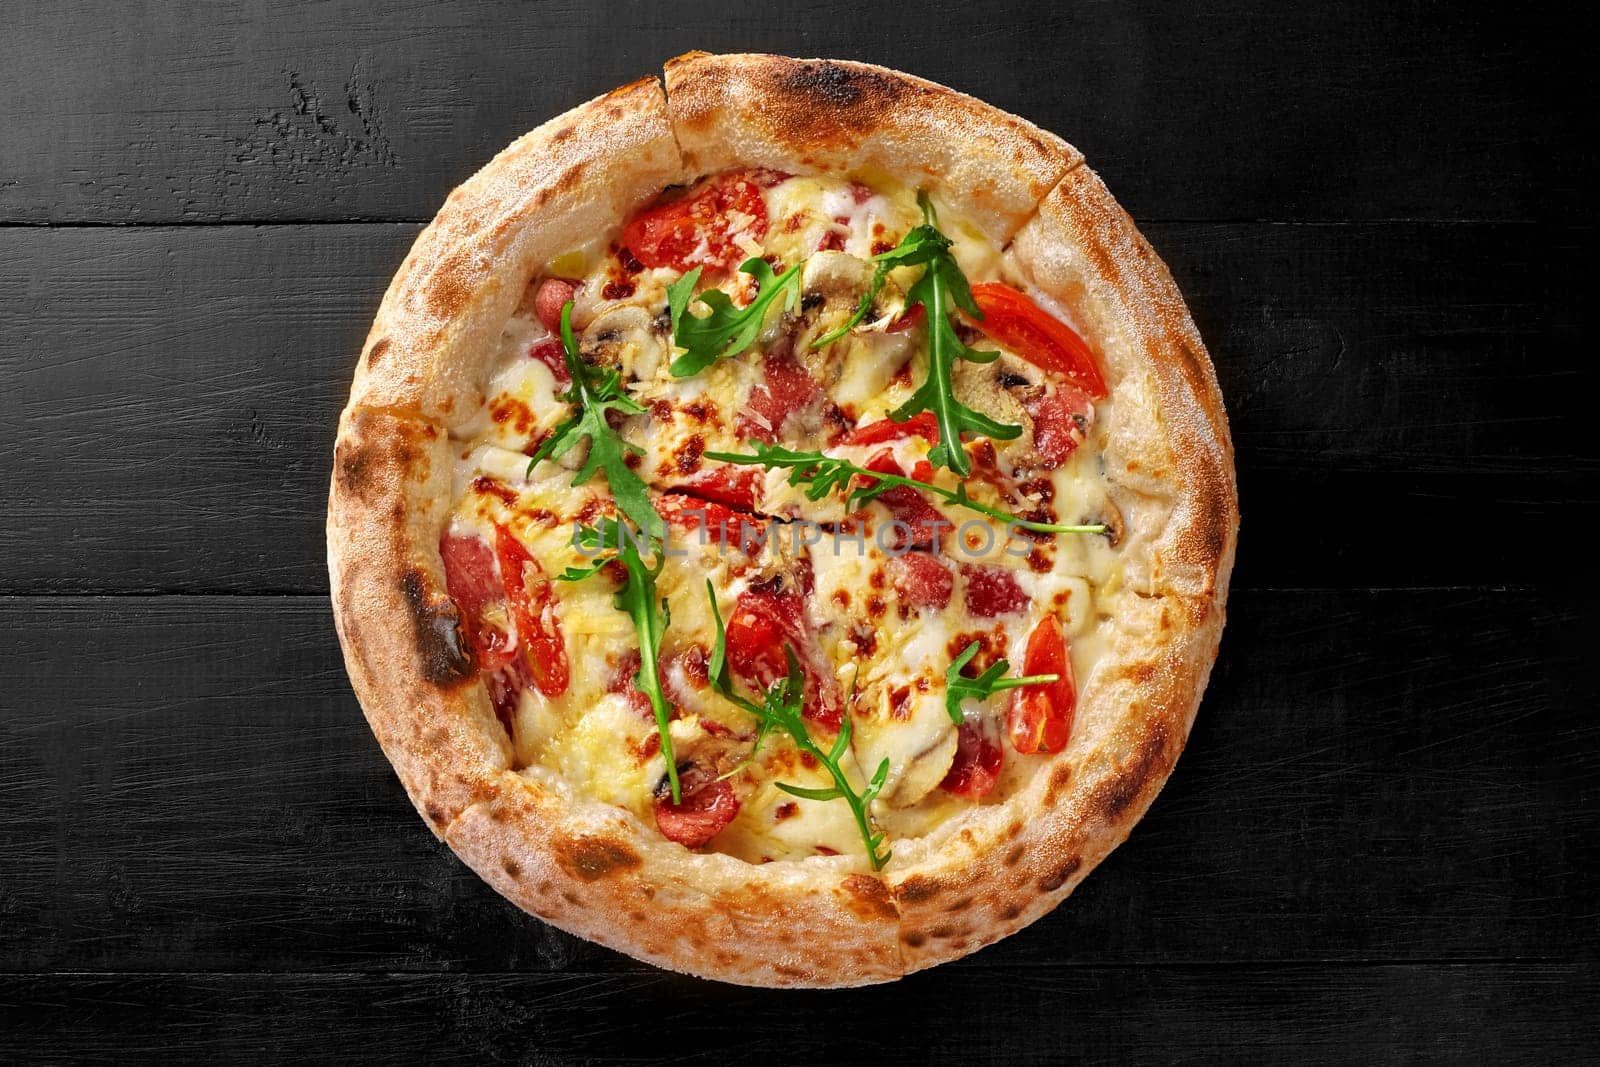 Delicious freshly baked pizza with cream cheese sauce, salami and bacon slices, mushrooms and tomatoes garnished with fresh fragrant arugula served on black wooden background